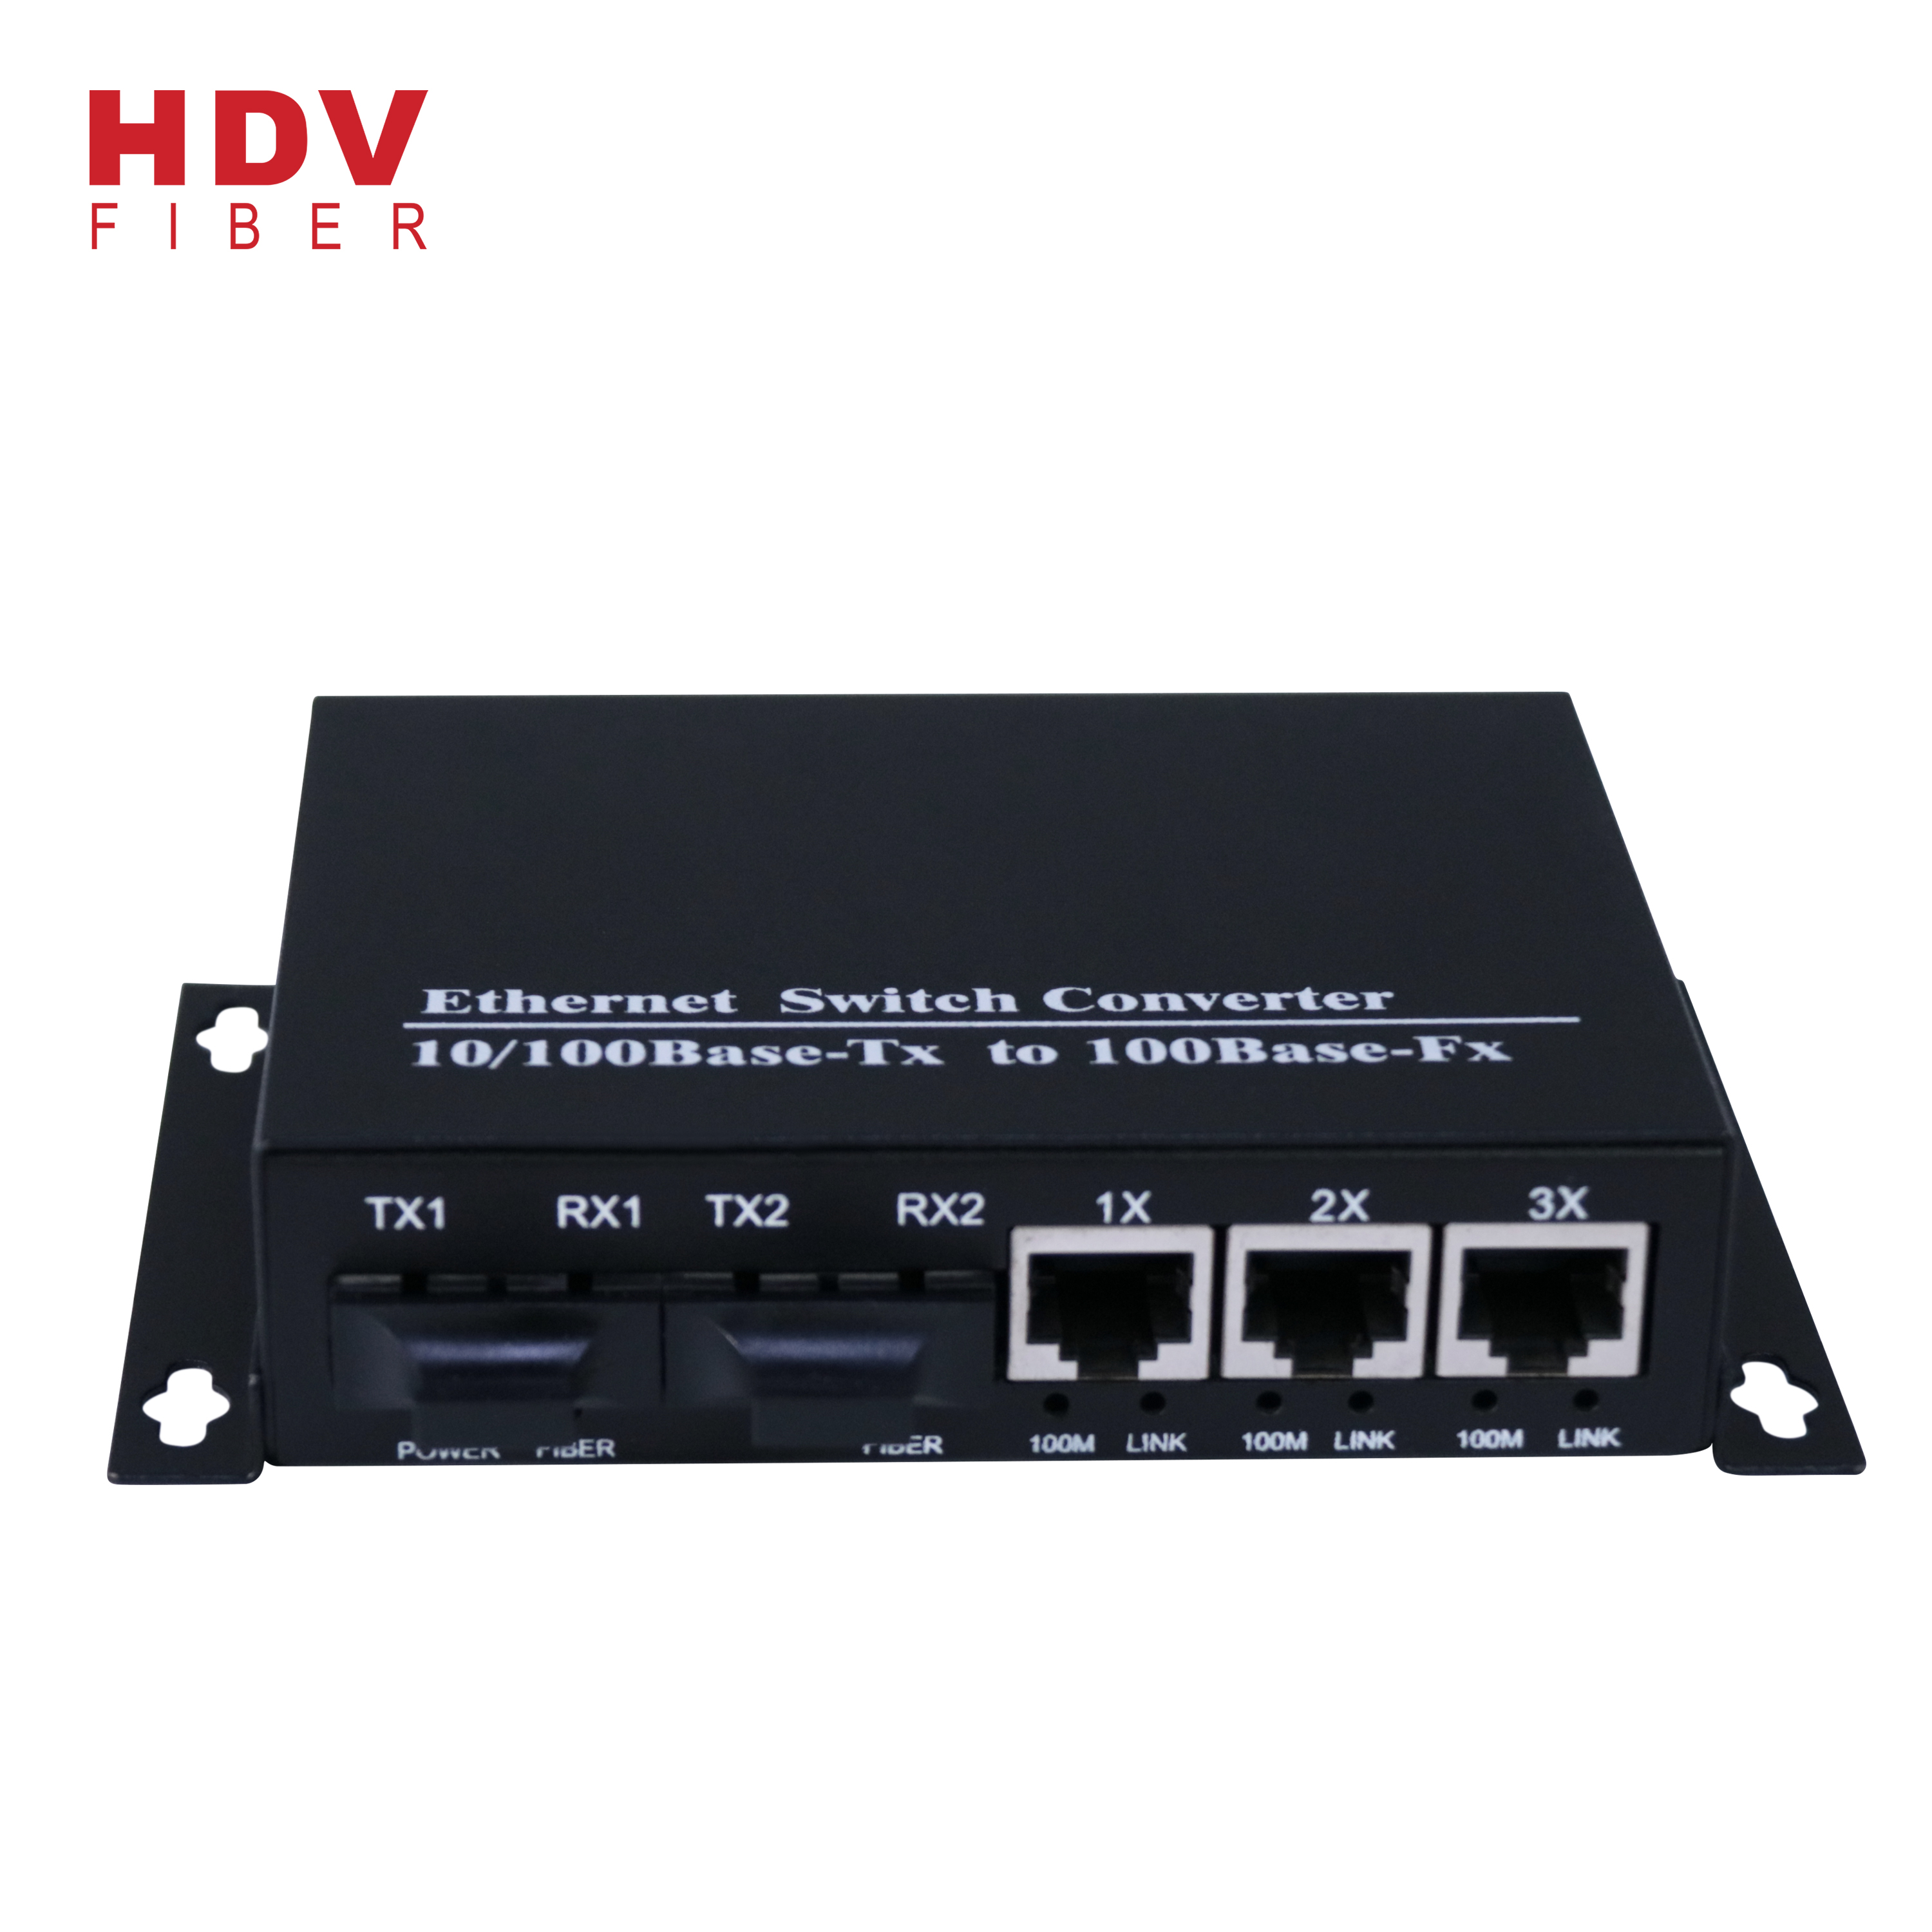 Factory Cheap Hot Fiber Optic Switch - New Model Dual Fiber Compatible Huawei Industrial 3 Port Ethernet Switch – HDV